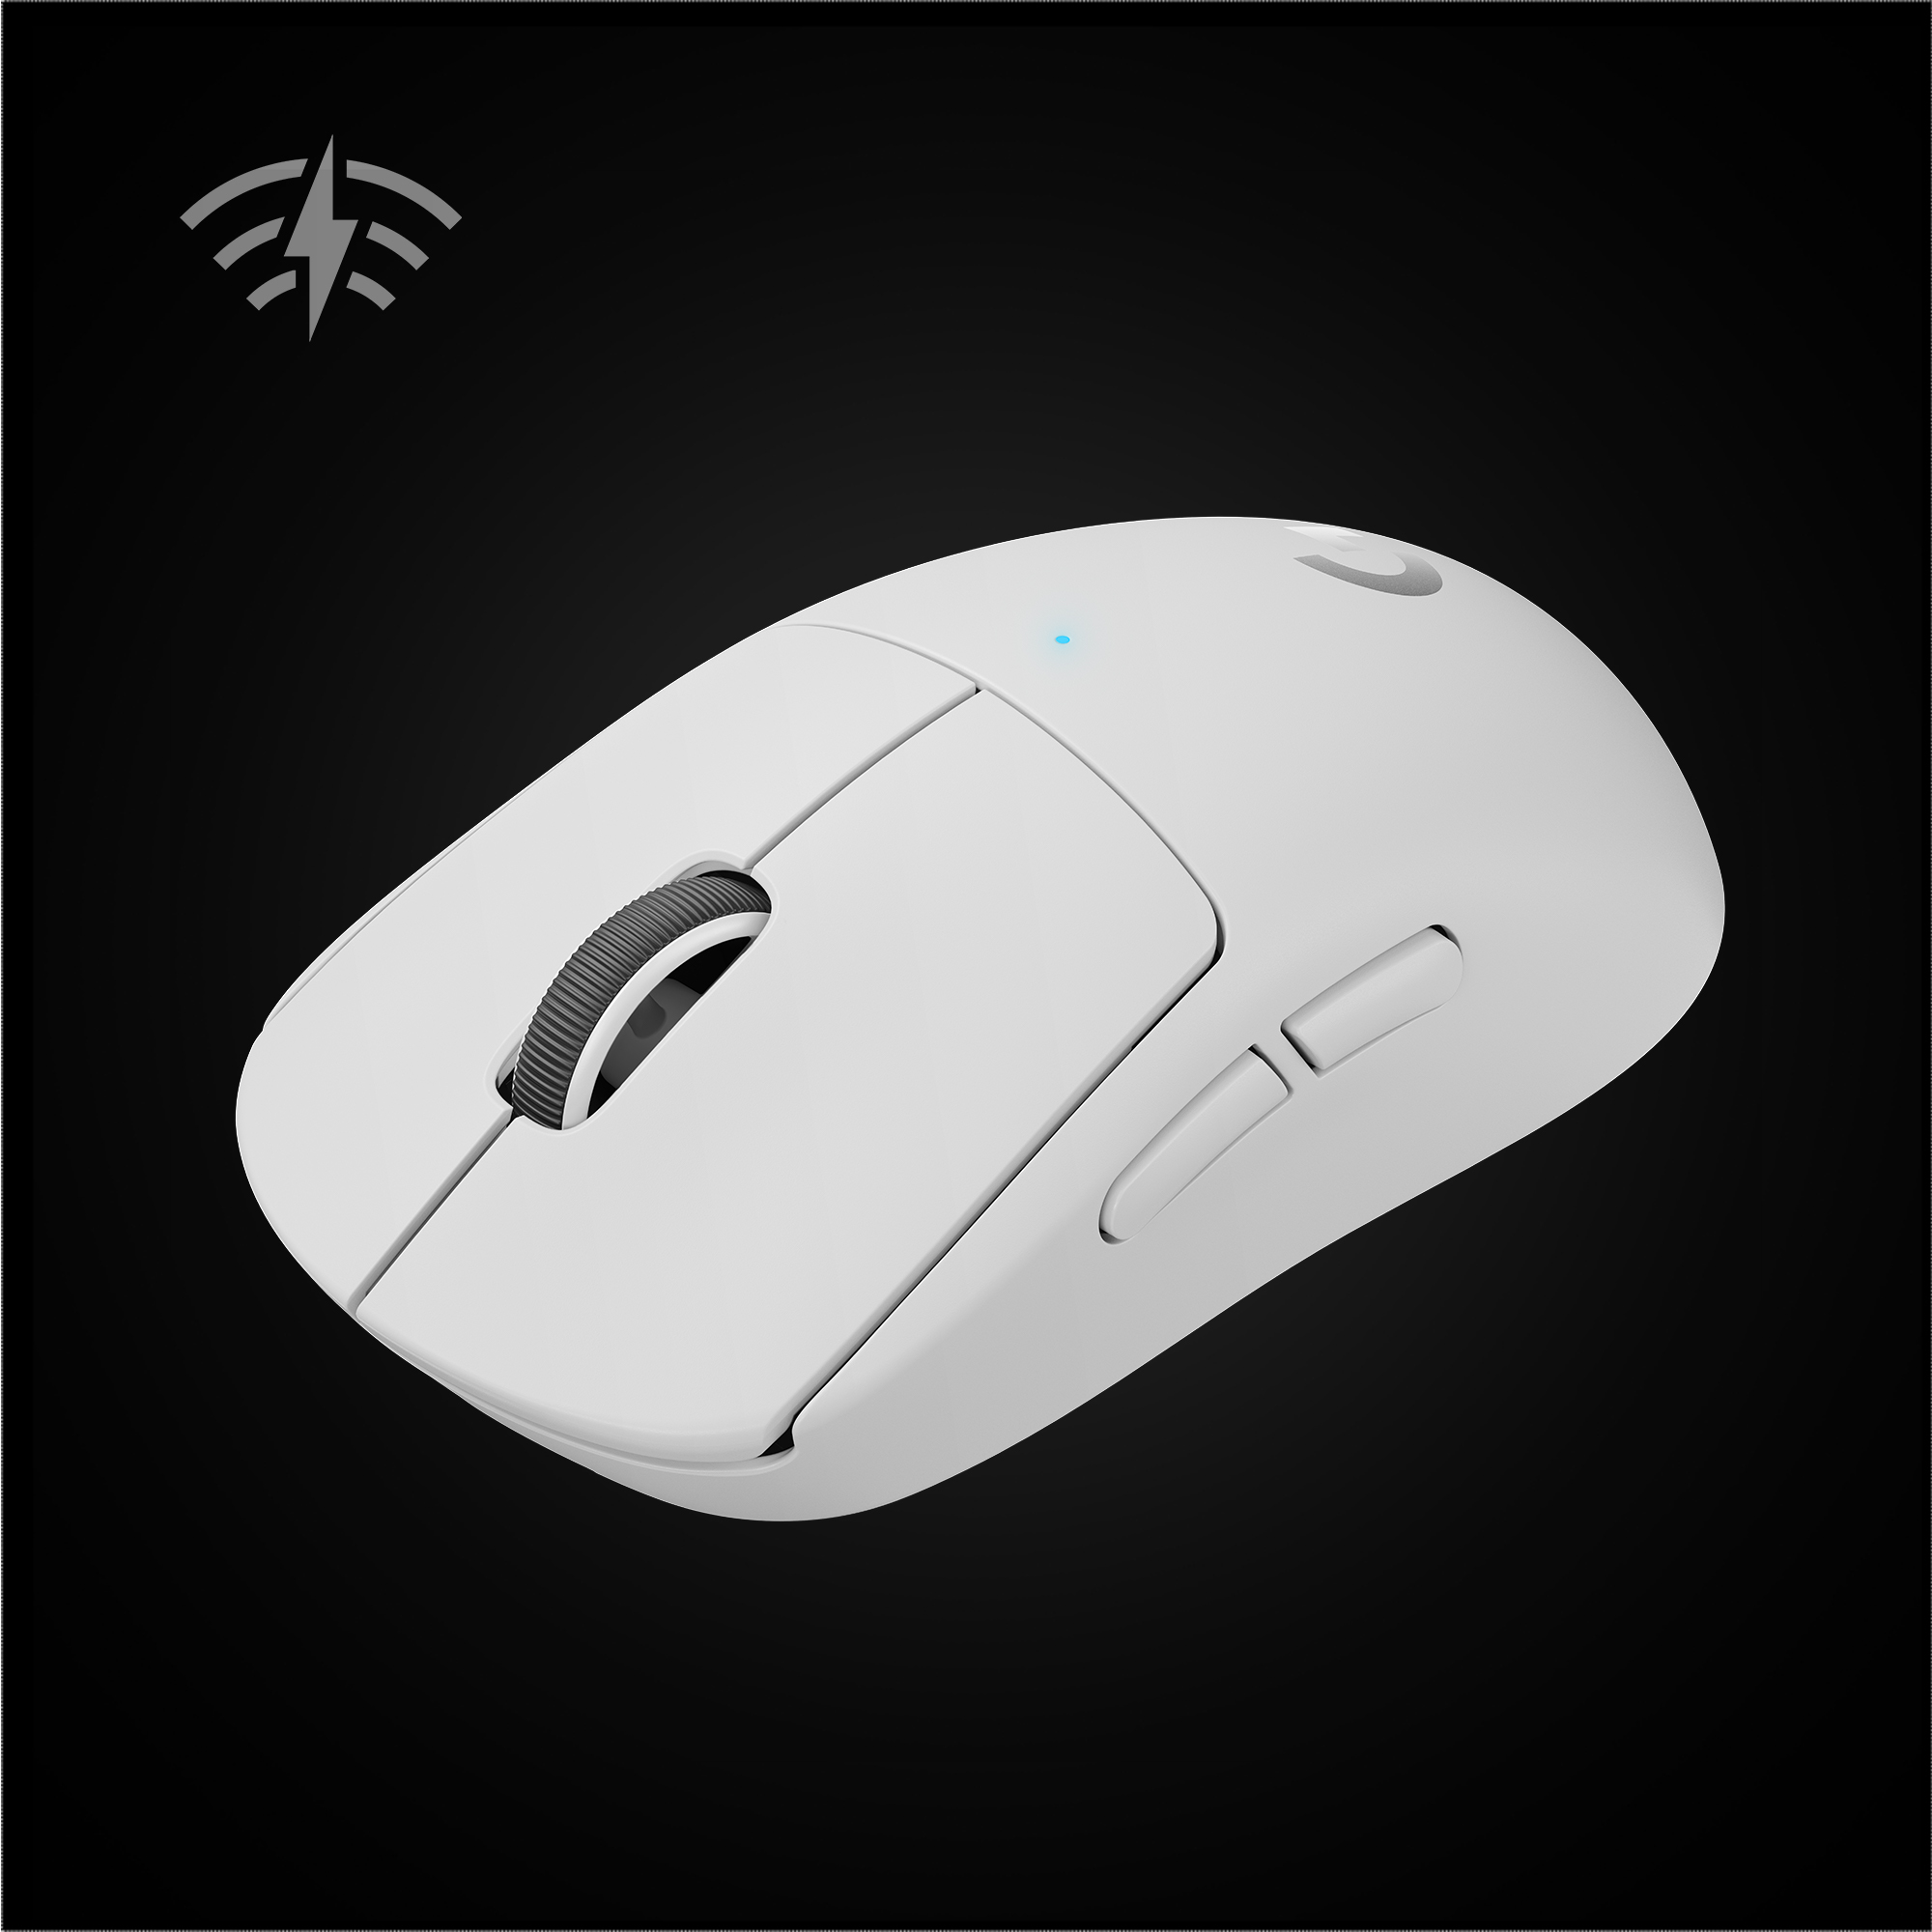 PRO X SUPERLIGHT Wireless Gaming Mouse White